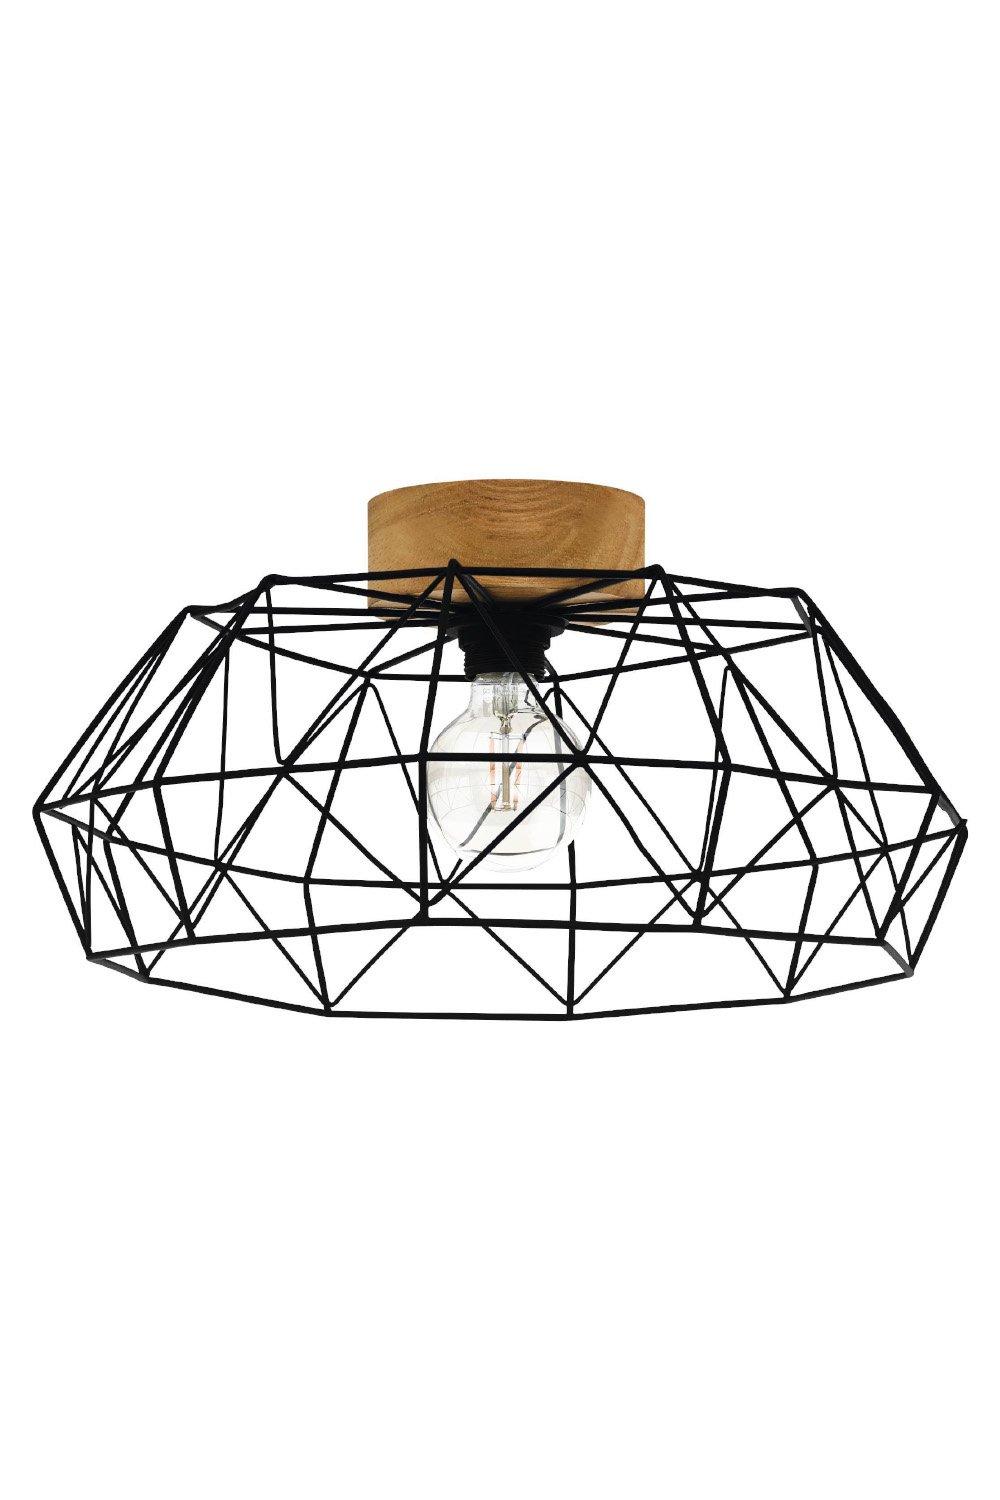 Padstow Natural Metal And Wood Ceiling Light